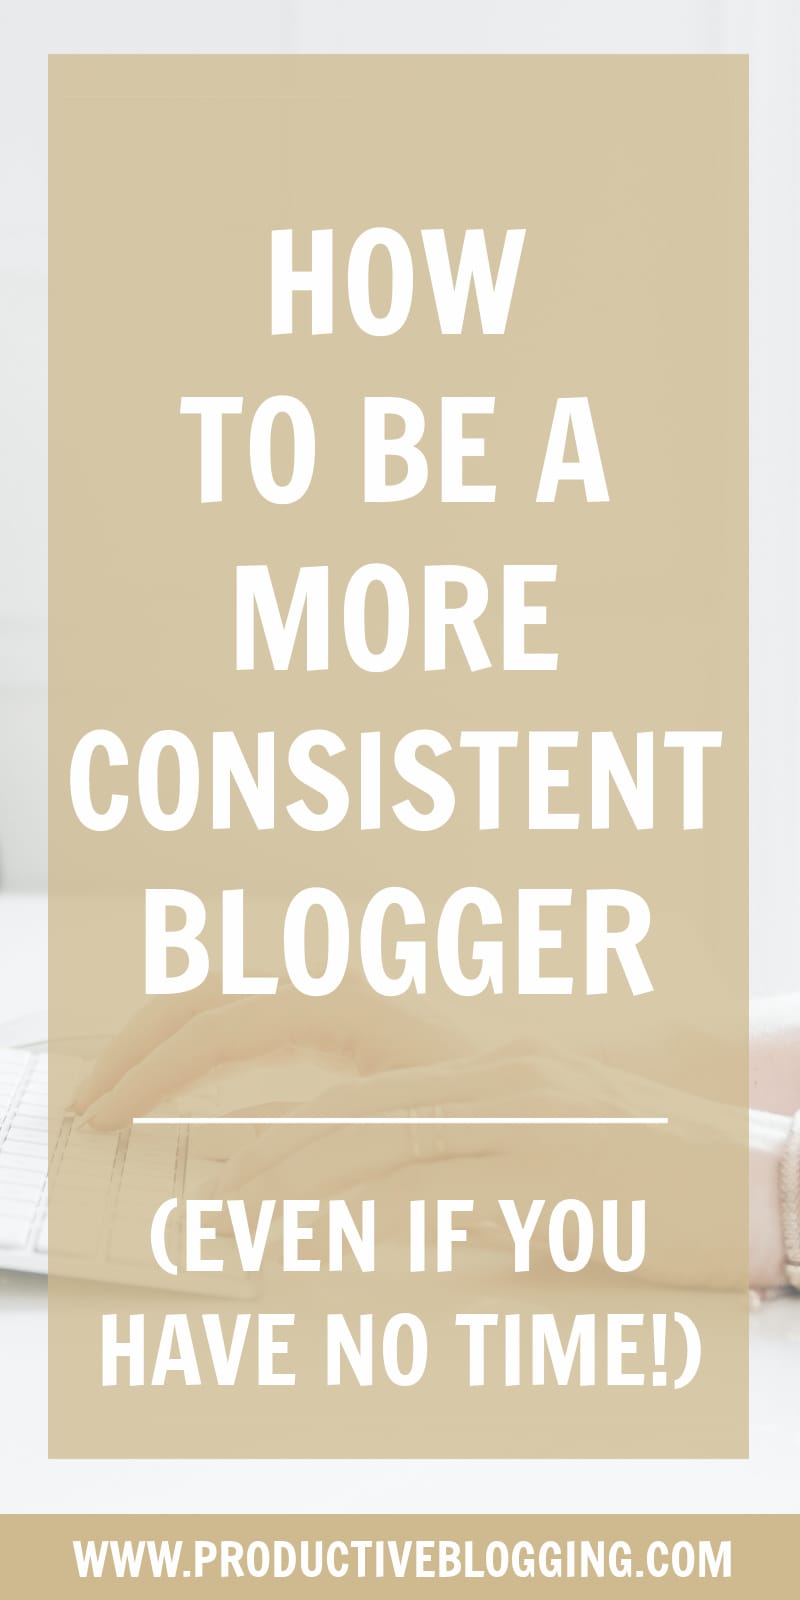 Consistent blogging is the key to successful blogging. But how? Here’s my step-by-step guide to blogging more consistently (even if you have NO TIME!) #consistent #consistentblogger #consistentblogging #blogconsistently #consistency #improveconsistency #todolist #dailytodos #dailyplanning #planning #timemanagement #efficiency #goals #blogginggoals #blog #blogging #blogger #bloggingtips #organised #organized #productivity #productivitytips #productiveblogging #blogsmarternotharder #BSNH